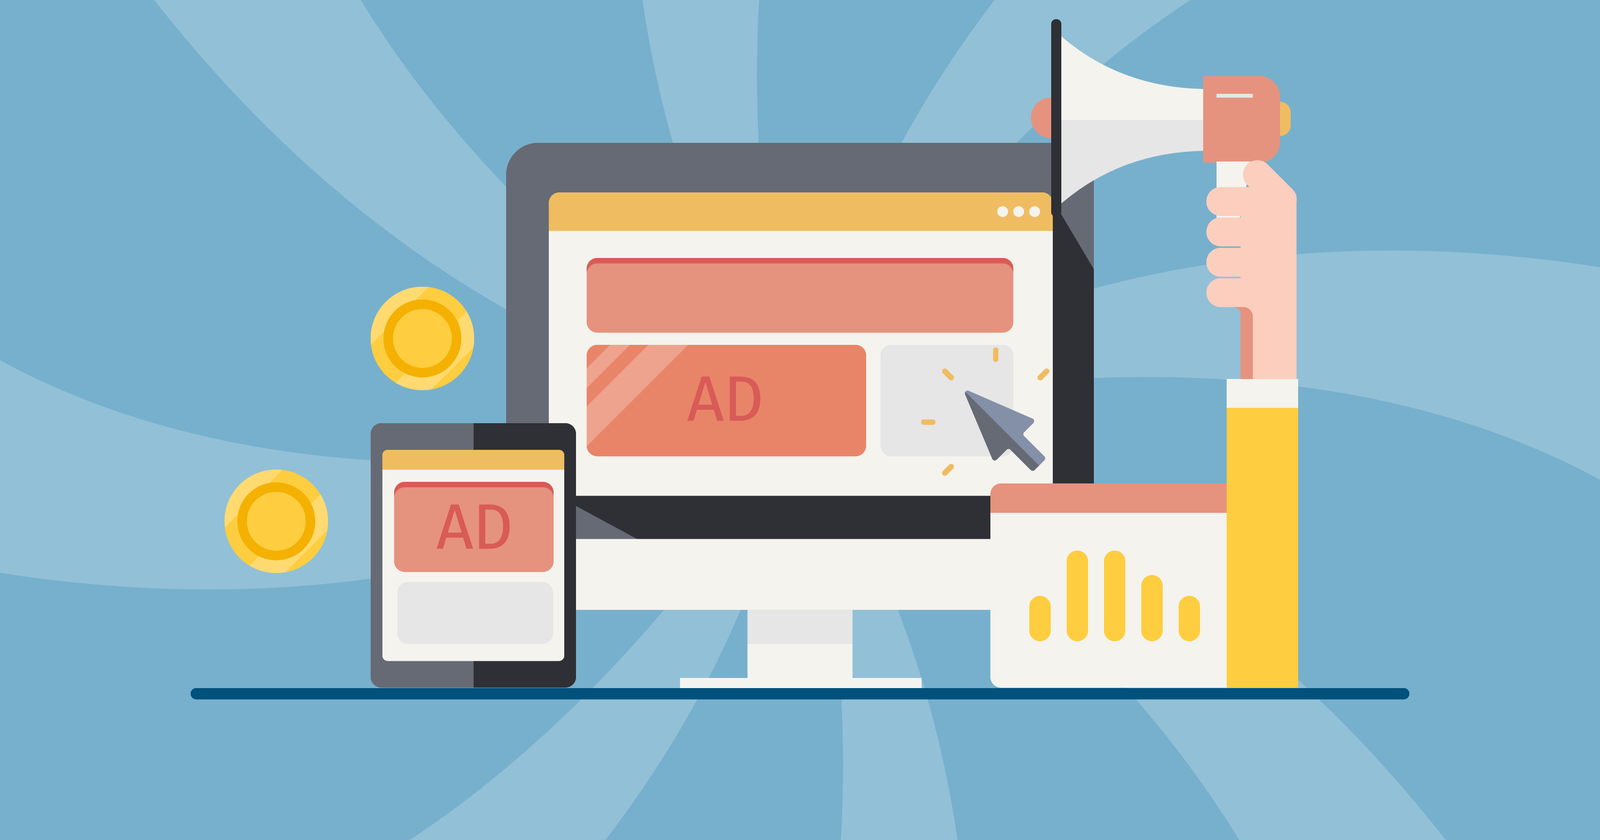 How To Use Paid Search & Social Ads For Promoting Events